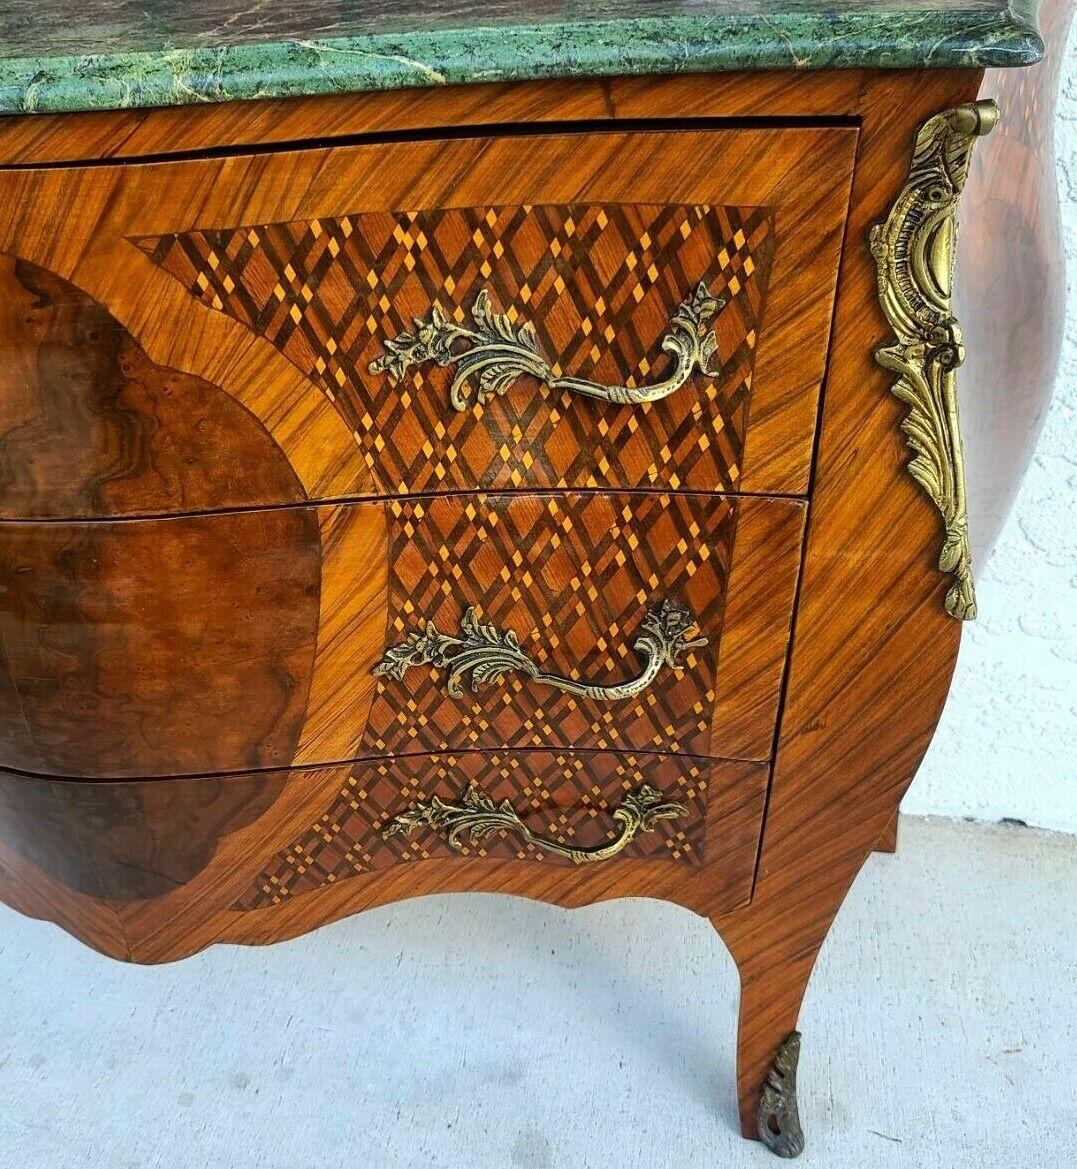 For FULL item description be sure to click on CONTINUE READING at the bottom of this listing.

Offering One Of Our Recent Palm Beach Estate Fine Furniture Acquisitions Of A French Louis XV Style Mahogany with Marble Top Commode Bombay Chest with